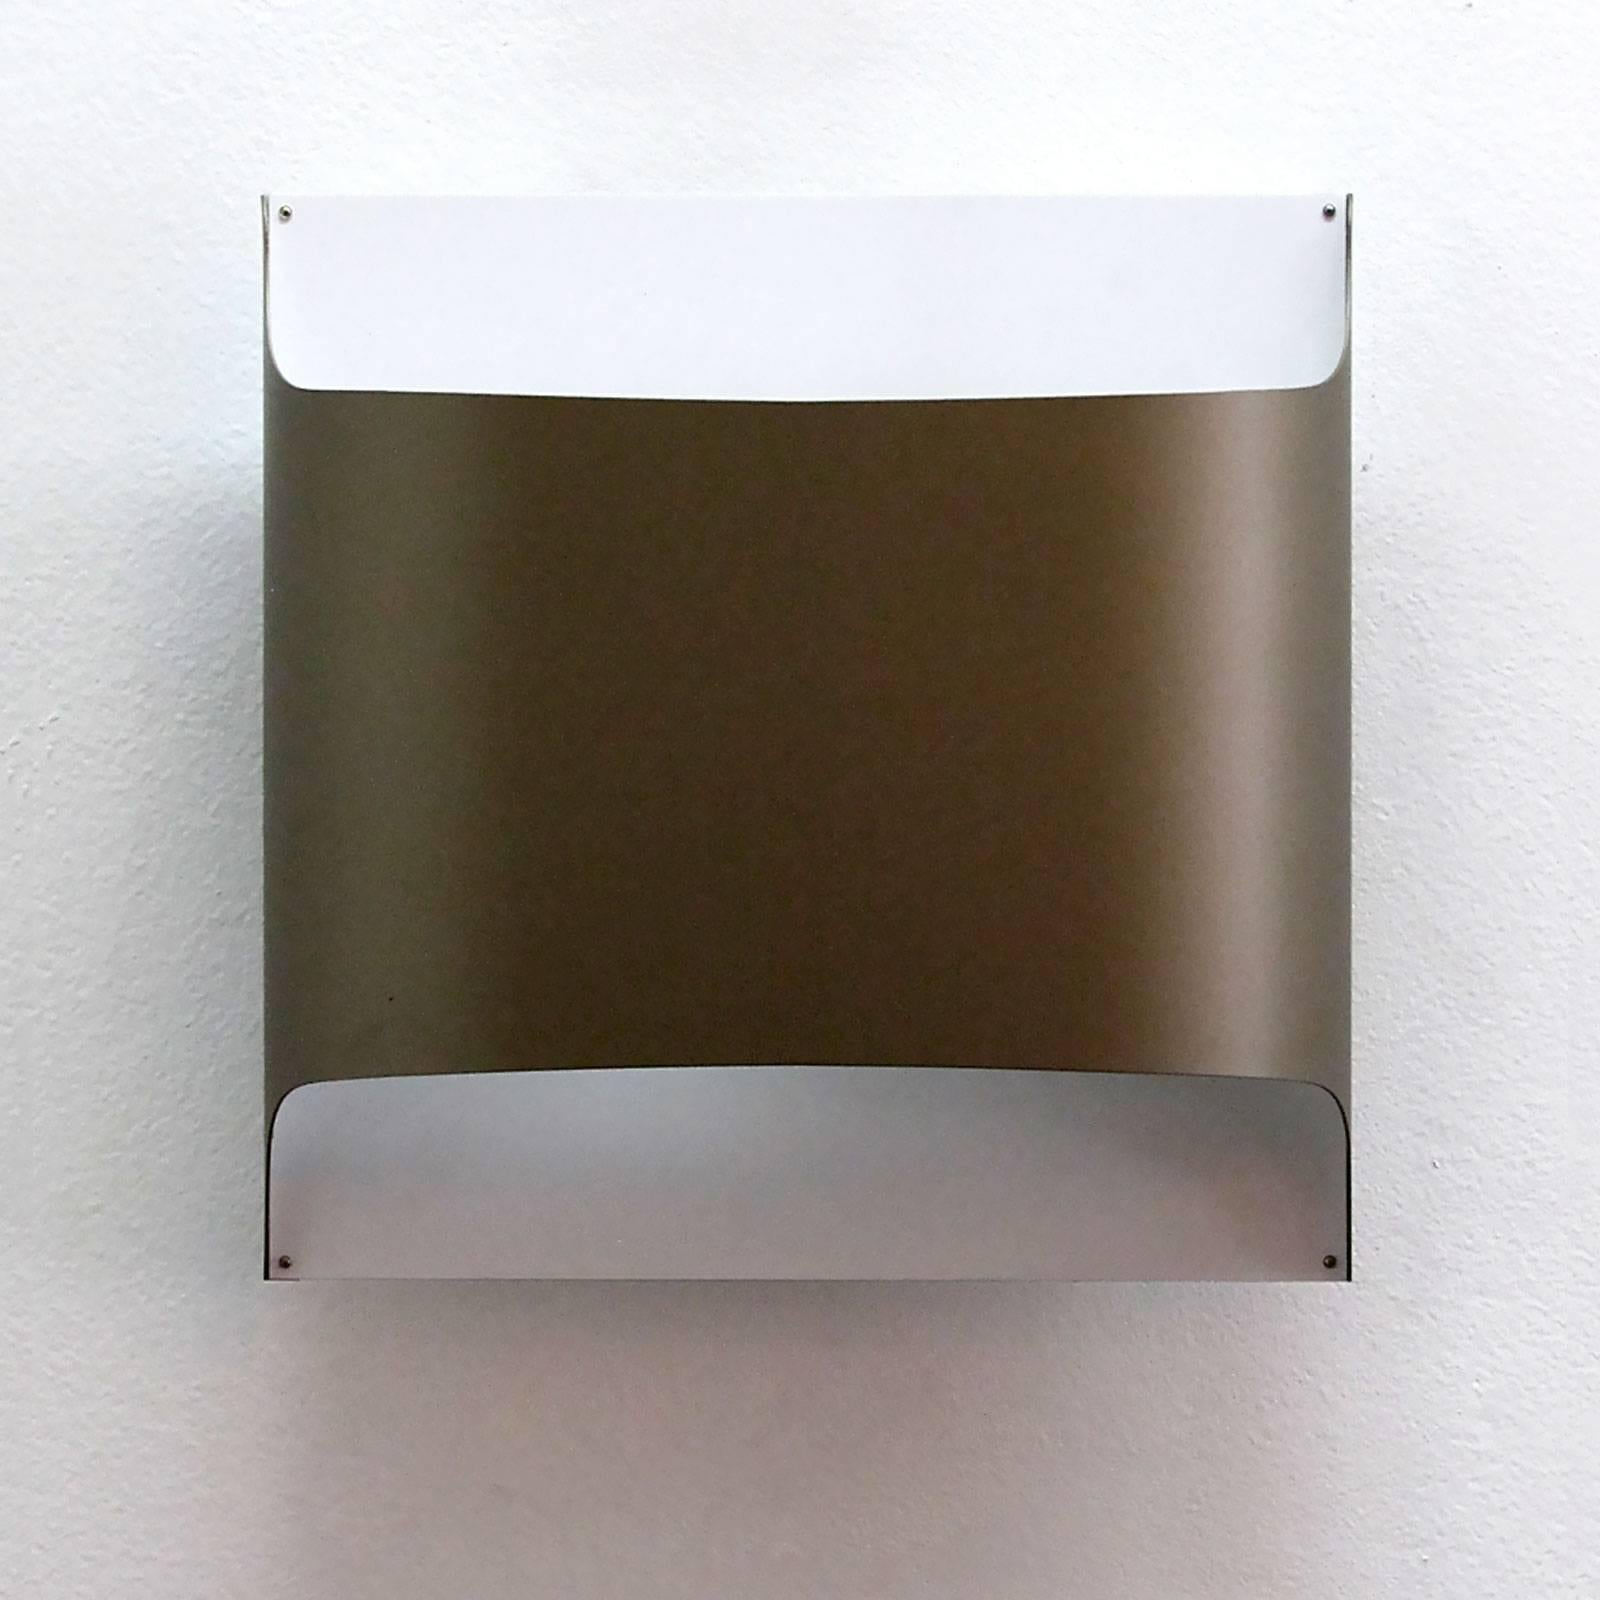 Minimalist folded metal wall lights by Staff of Germany in ivory-white and near bronze-brown color, can be used as flush mount ceiling lights as well. Designed by R. Kruger & D. Witte in 1968. Priced individually.